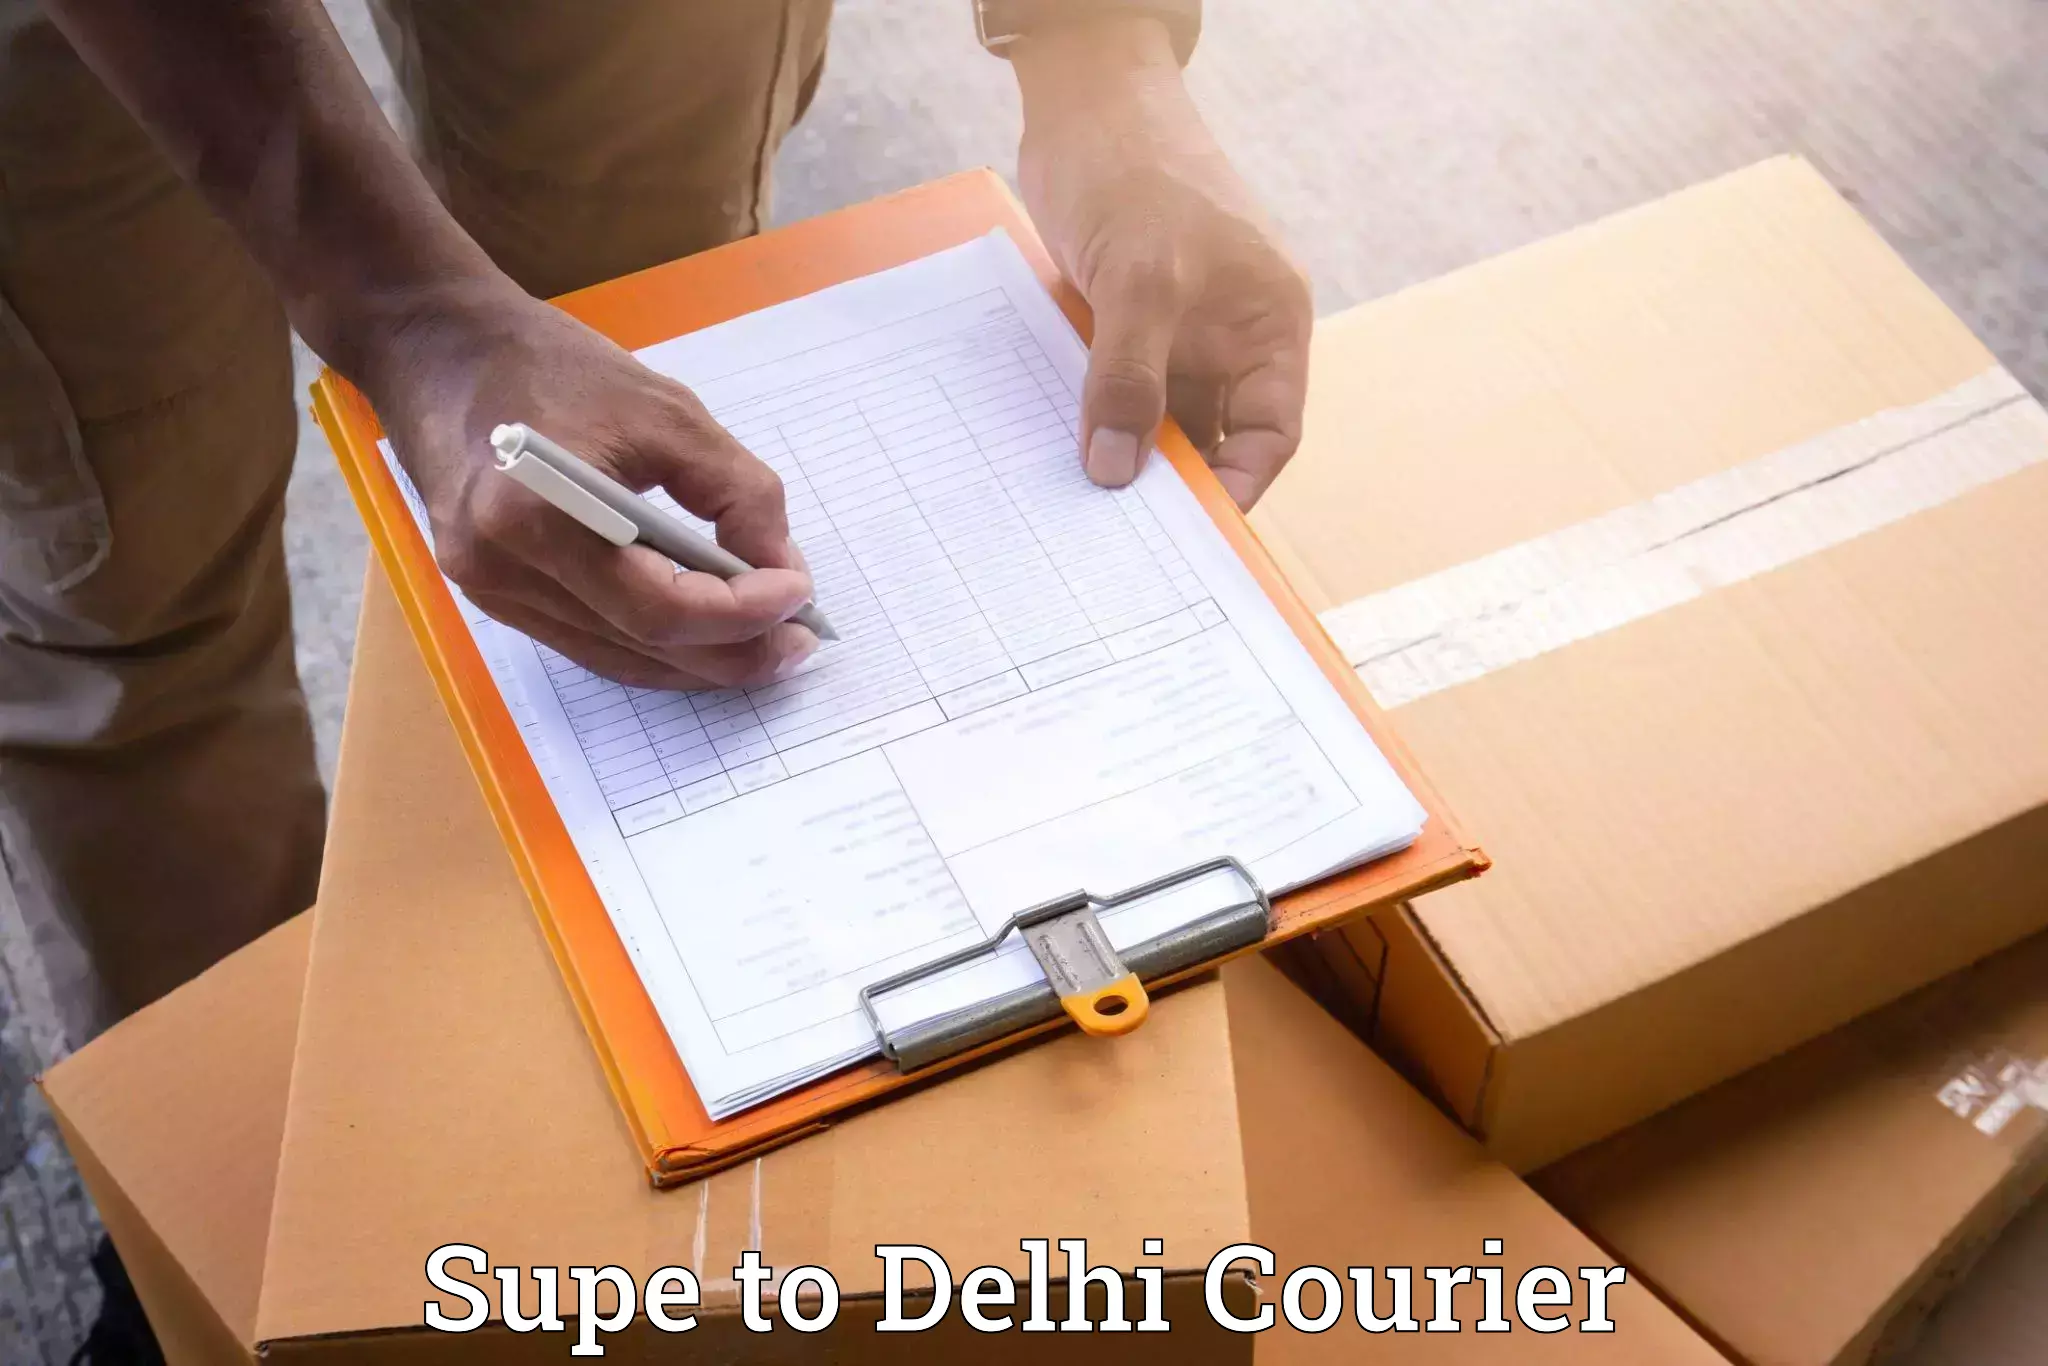 Household goods transporters Supe to Delhi